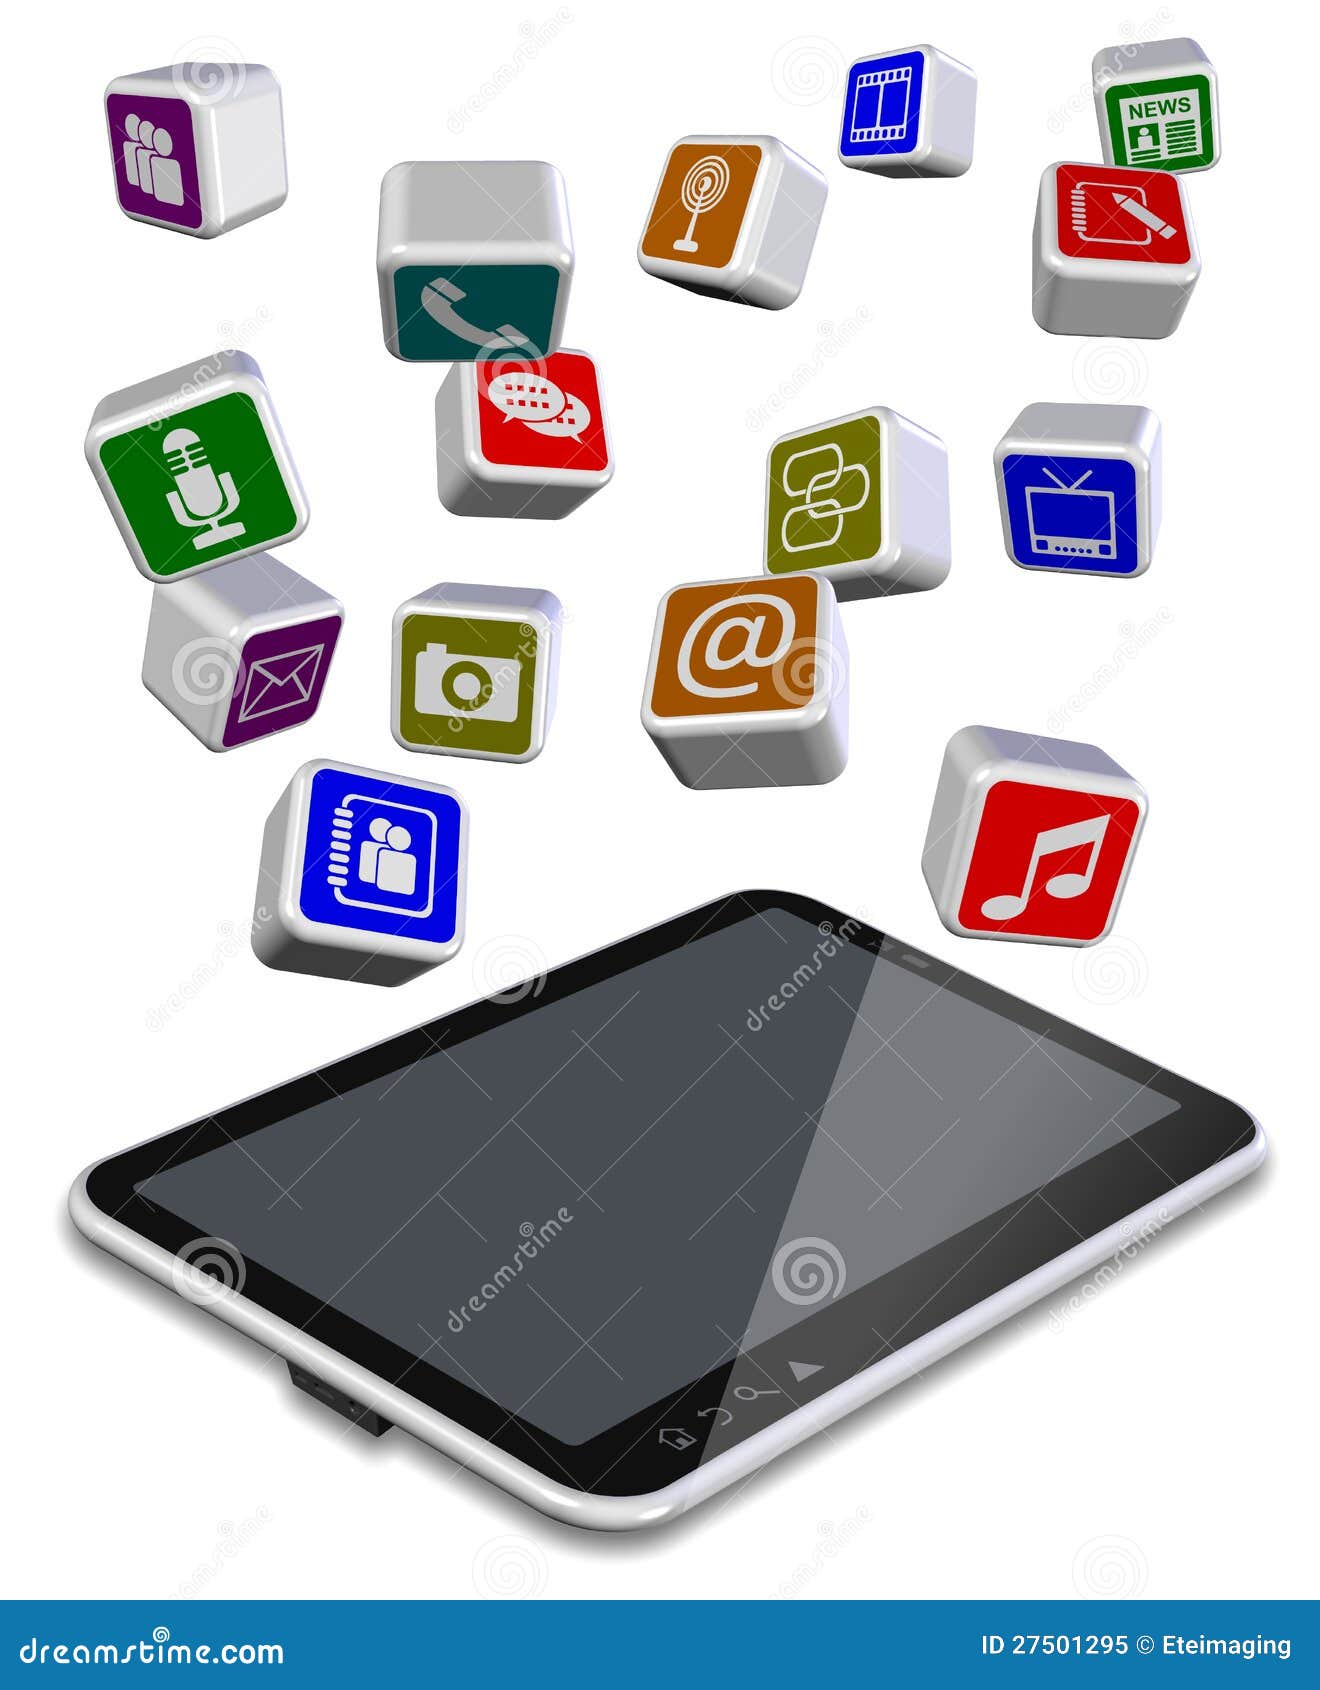 number of different application icons flying above tablet PC.